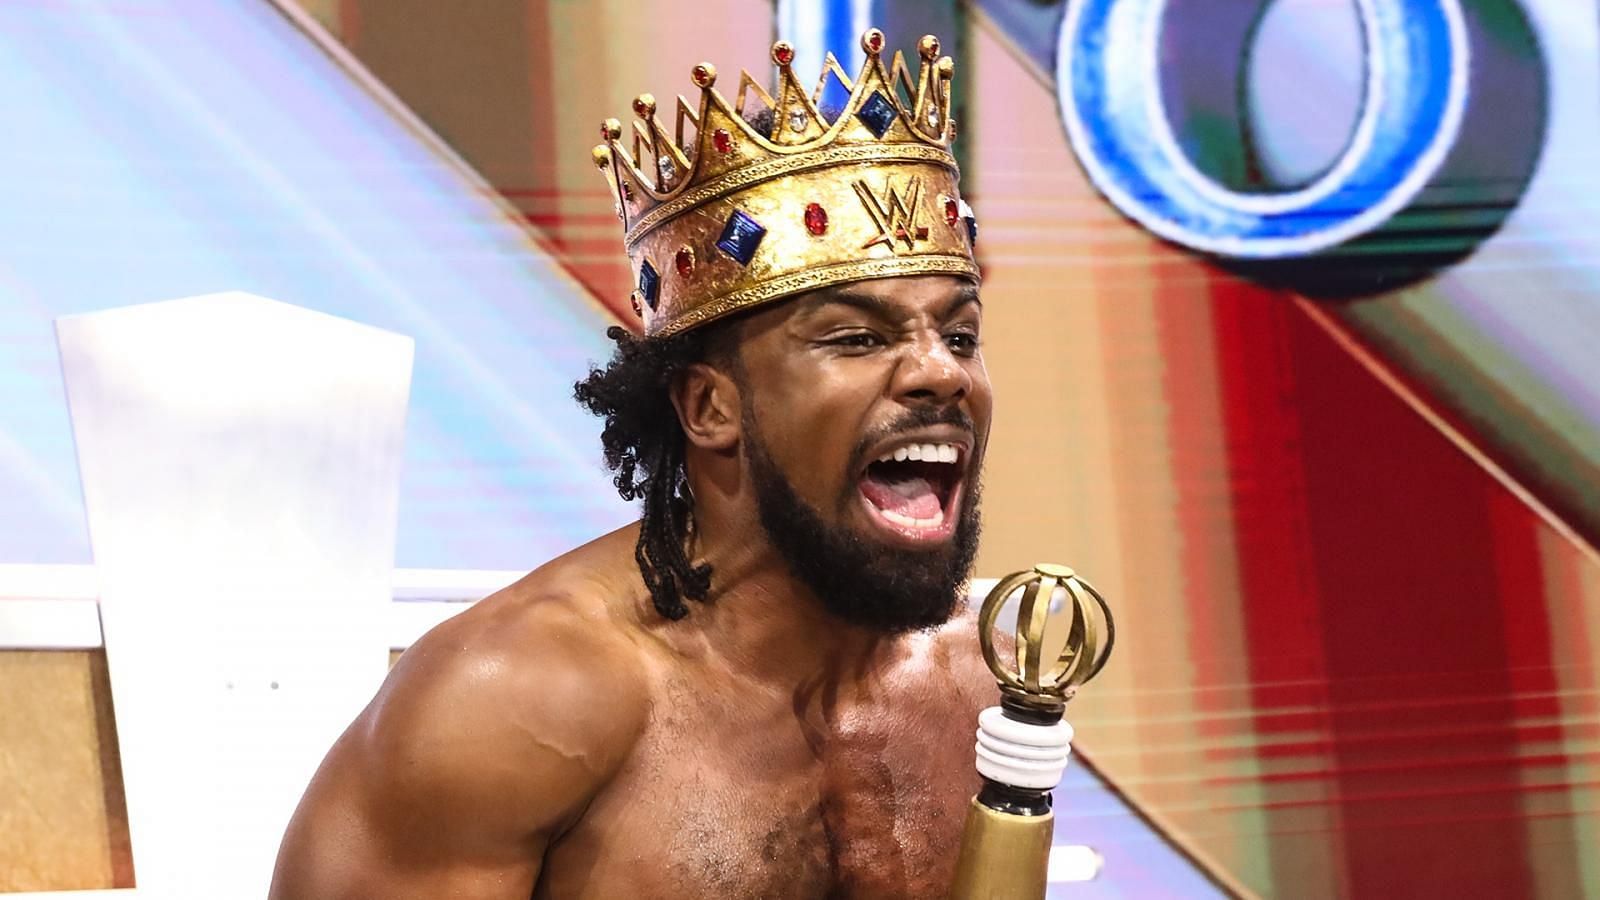 A buoyant Xavier Woods after being anointed King at Crown Jewel